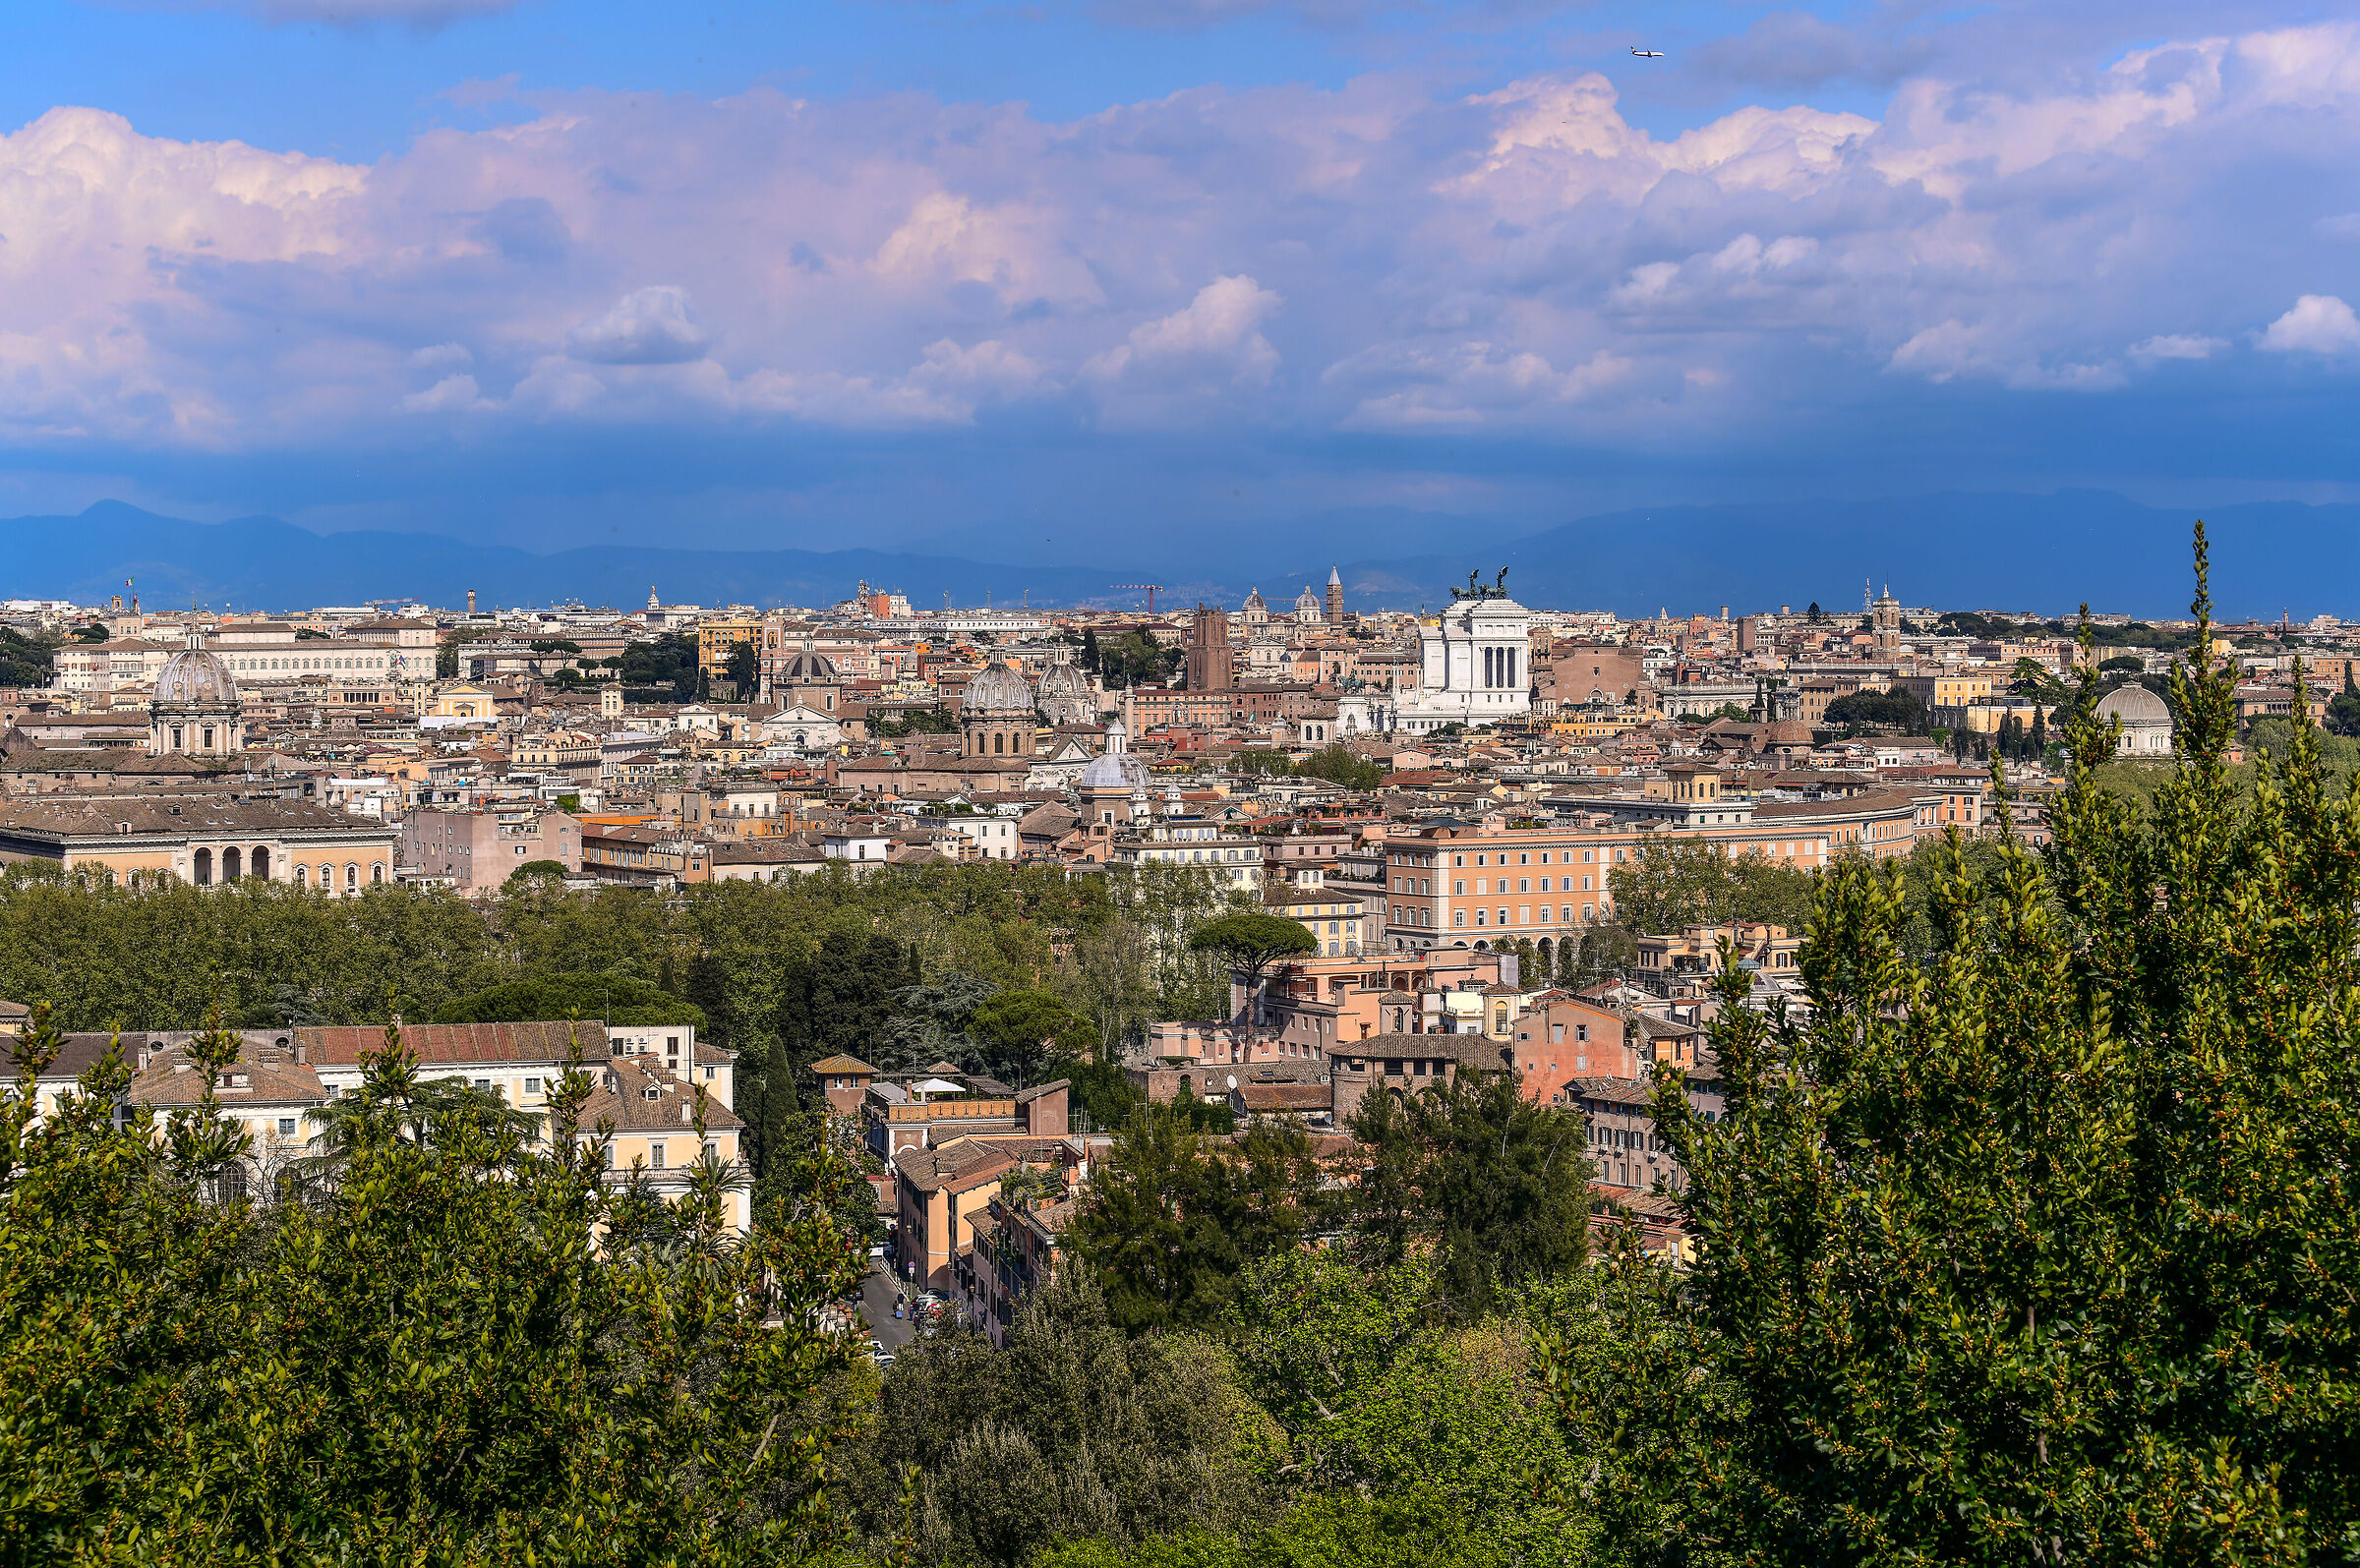 A part of Rome from the Janiculum...